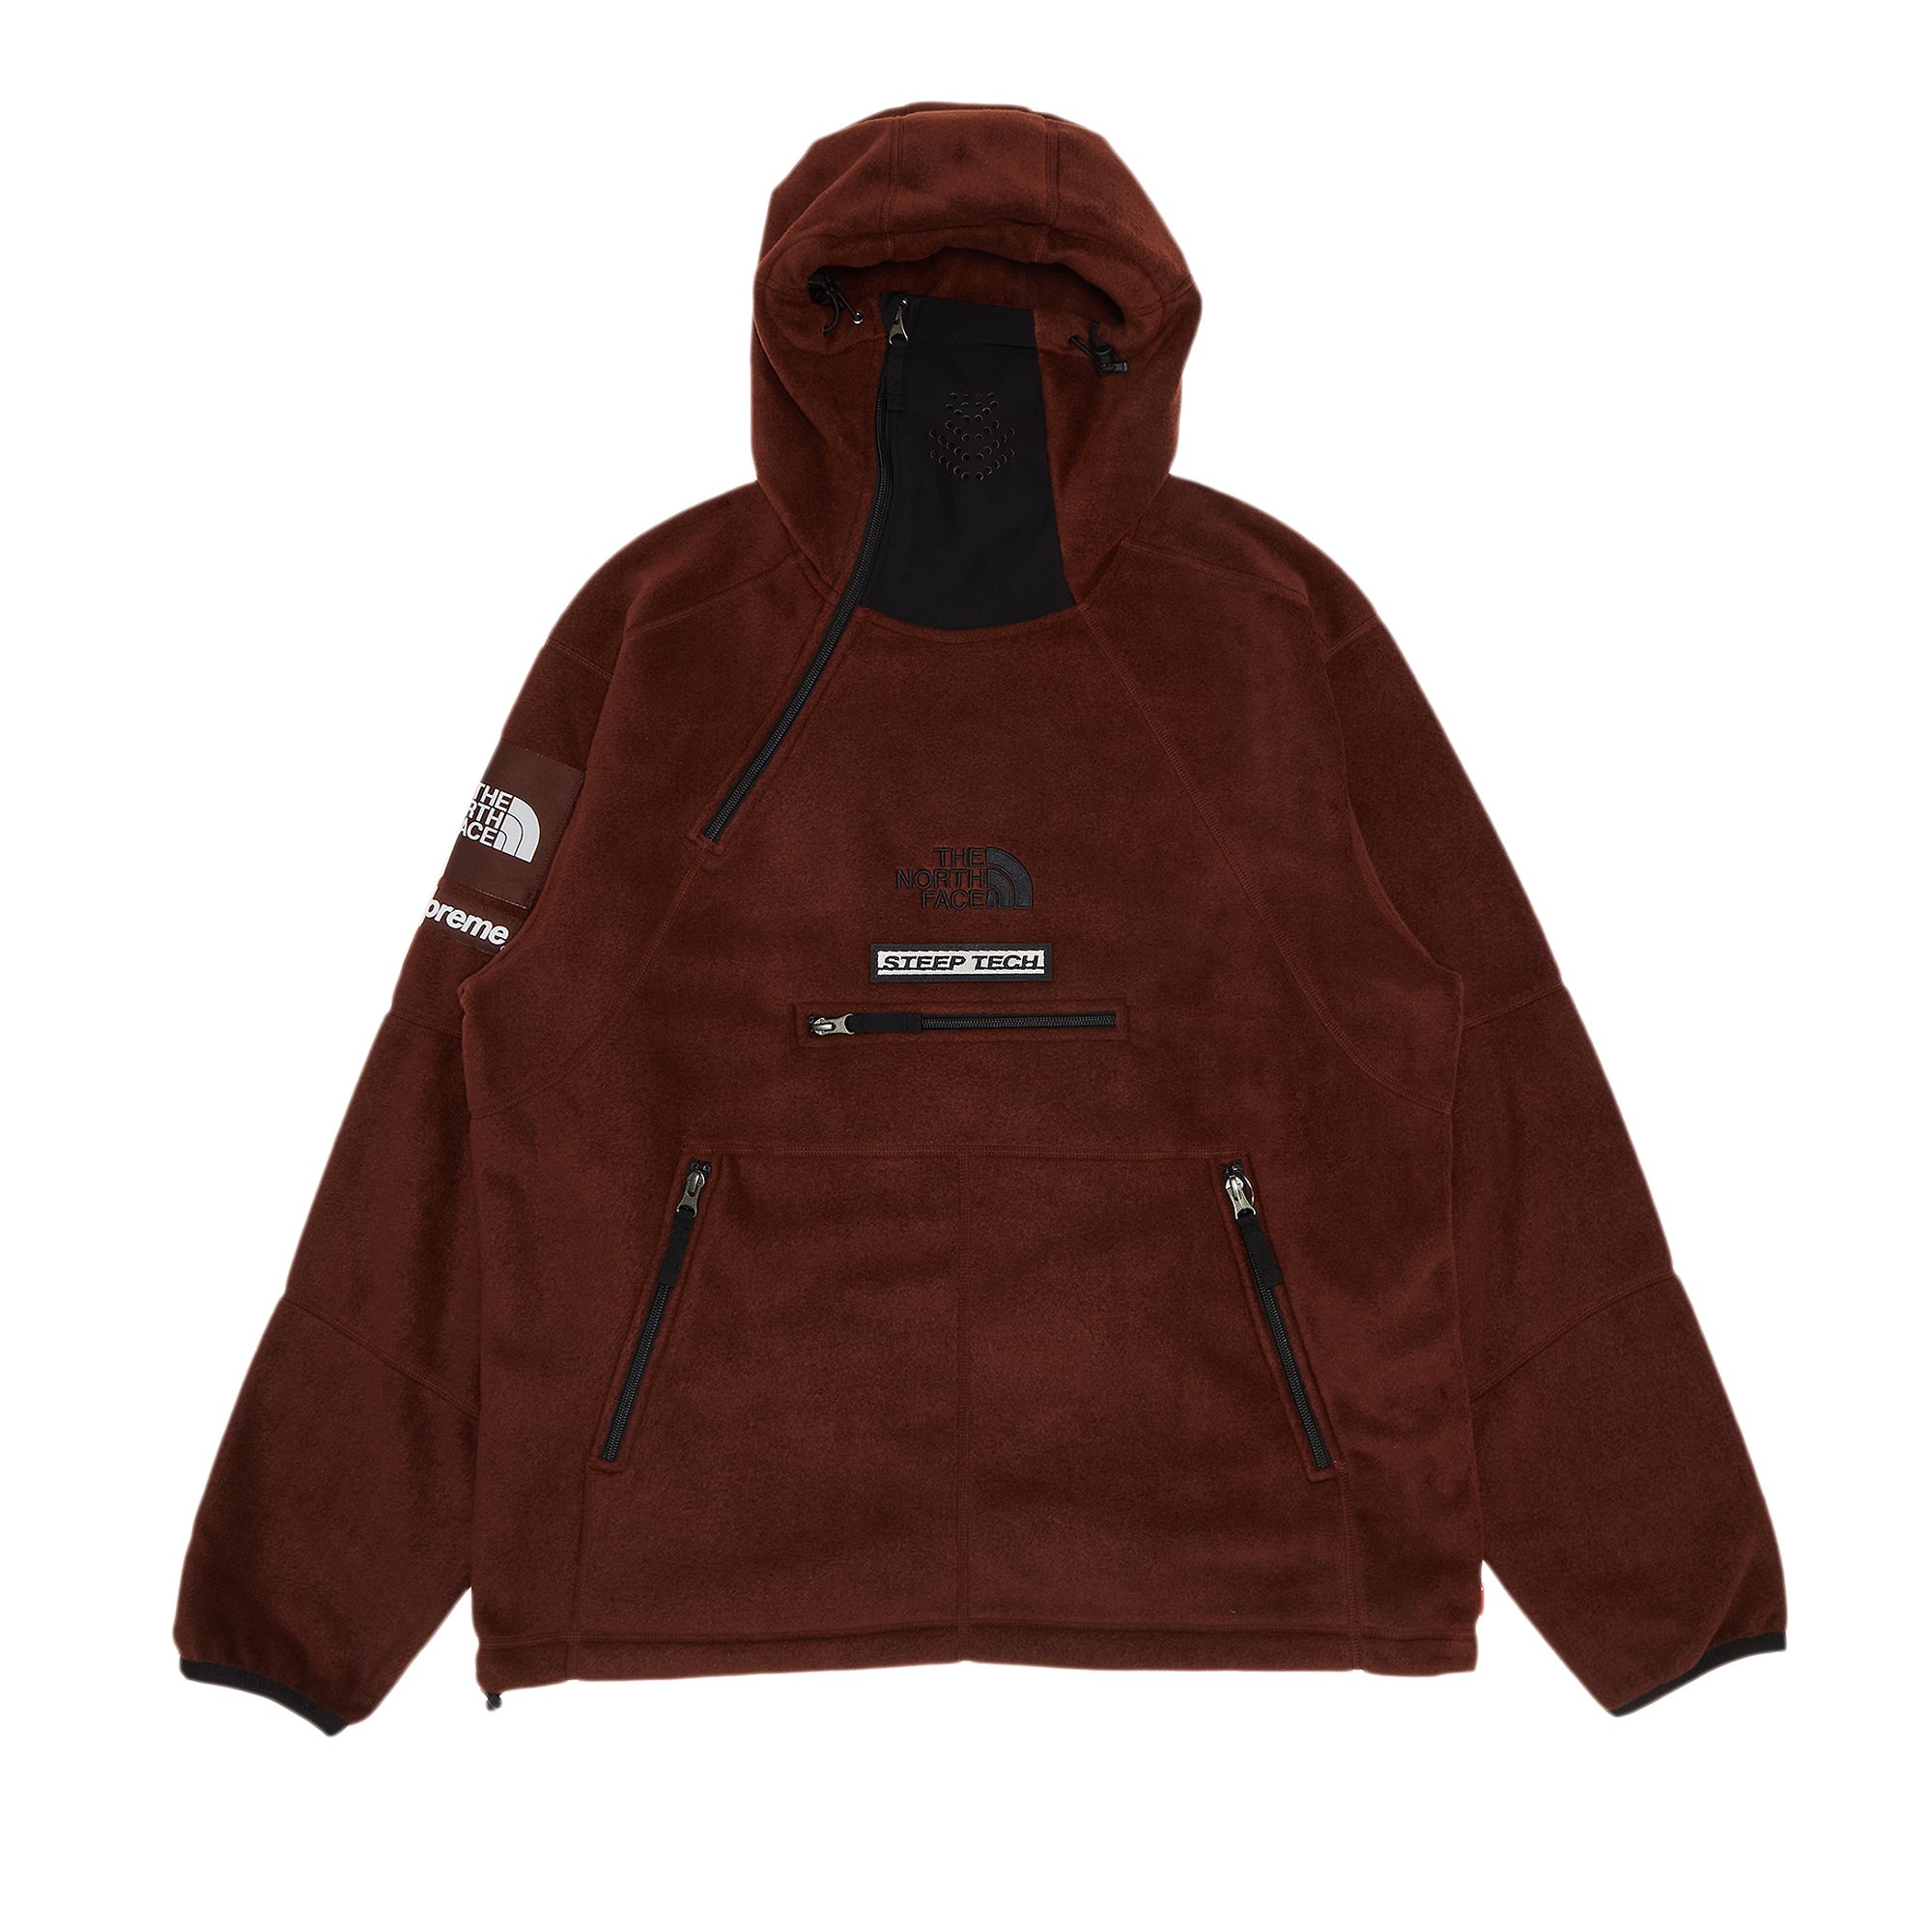 Buy Supreme x The North Face Steep Tech Fleece Pullover 'Brown